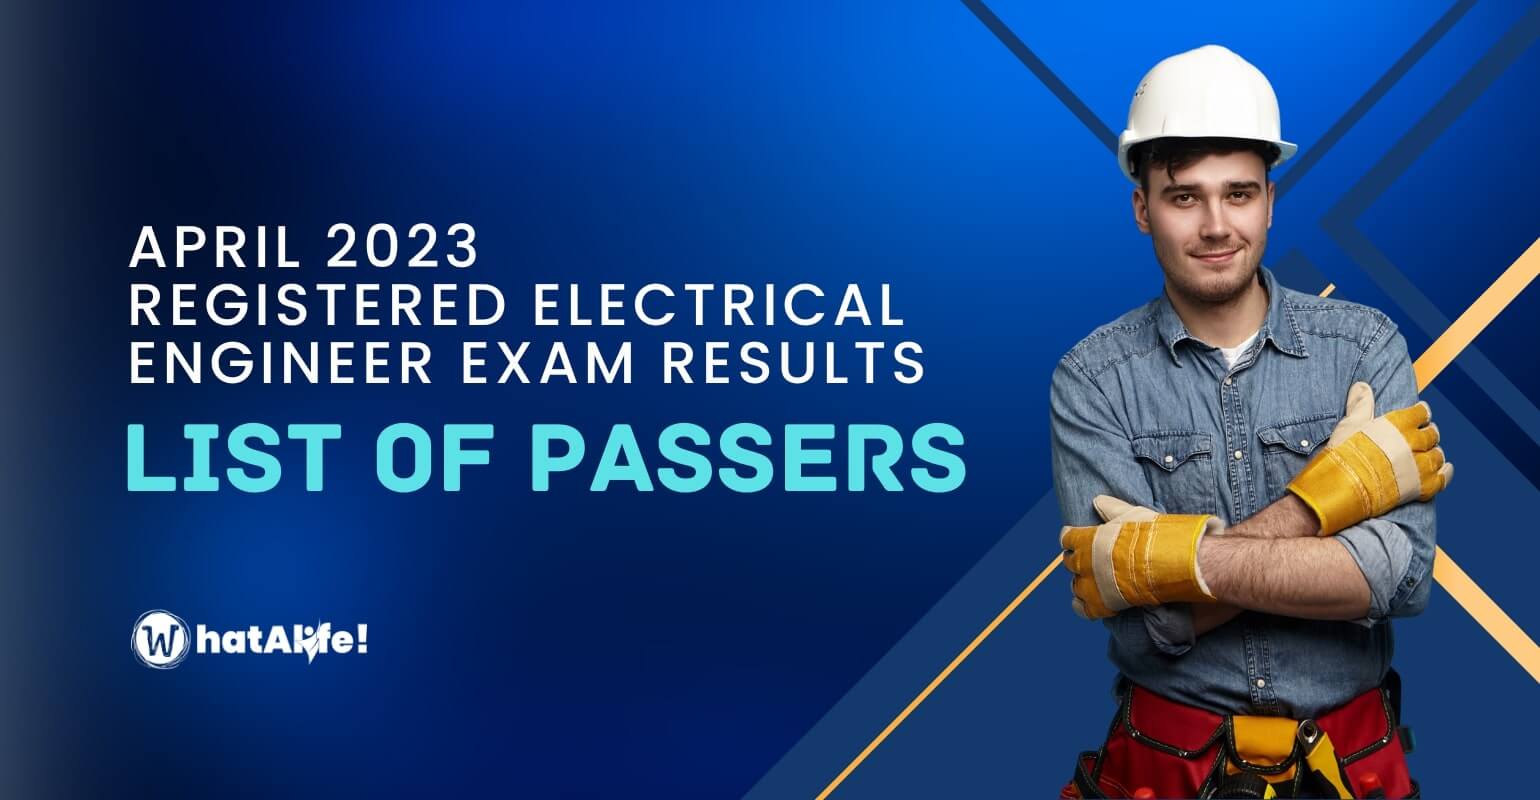 Full List of Passers —  April 2023 Registered Electrical Engineer Licensure Exam